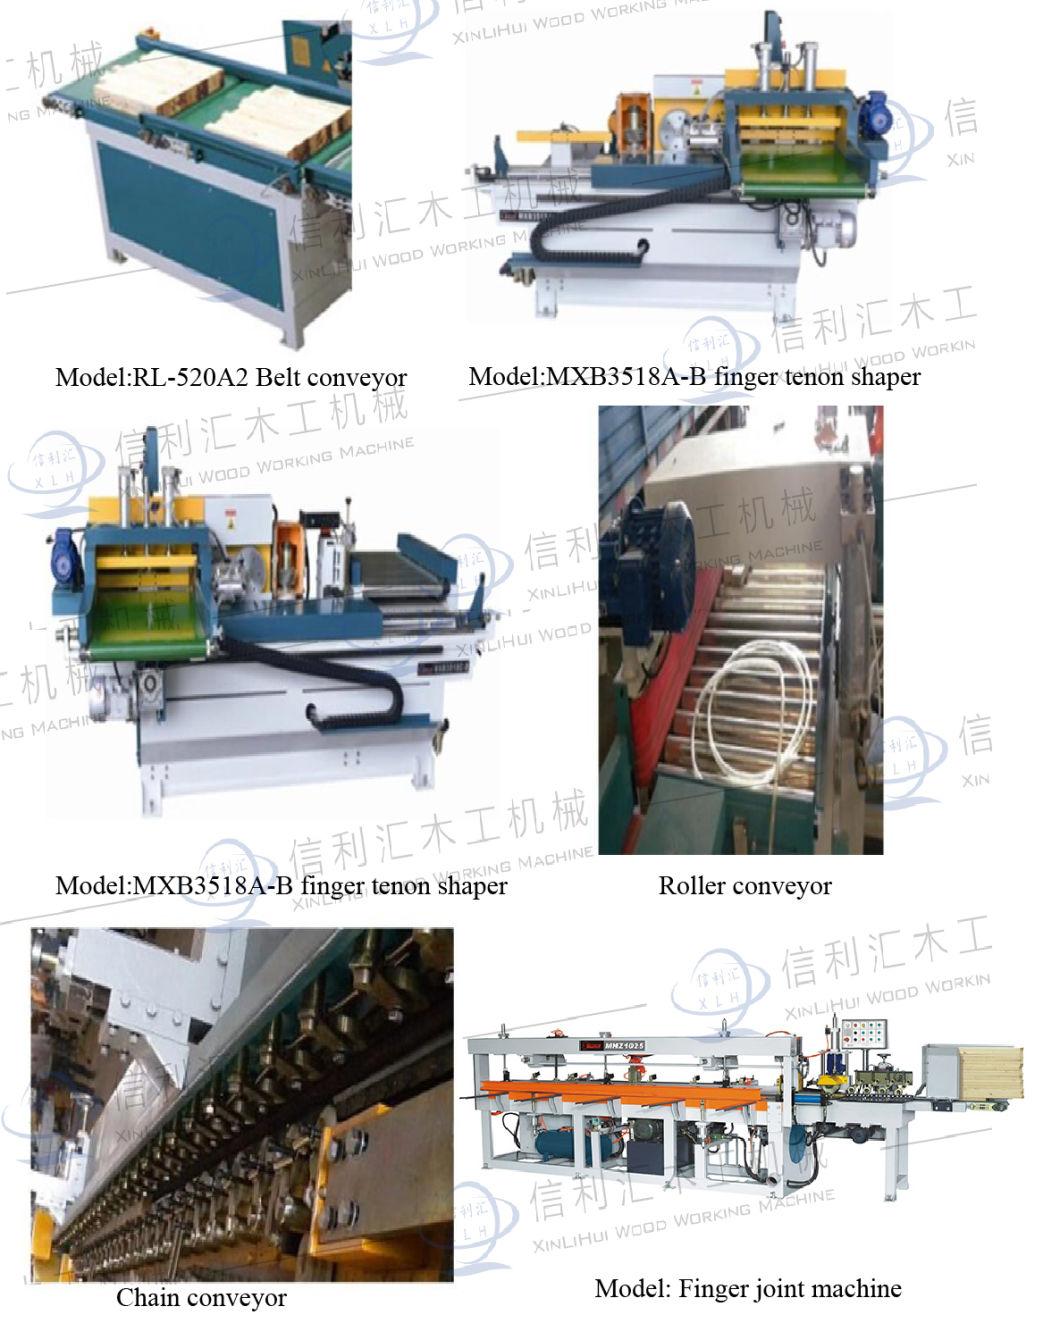 Automatic Infinite Lengthening Comb Joint Machine Mxb3518 with Maximum Wood Width 590mm and Maximum Wood Thickness 150mm